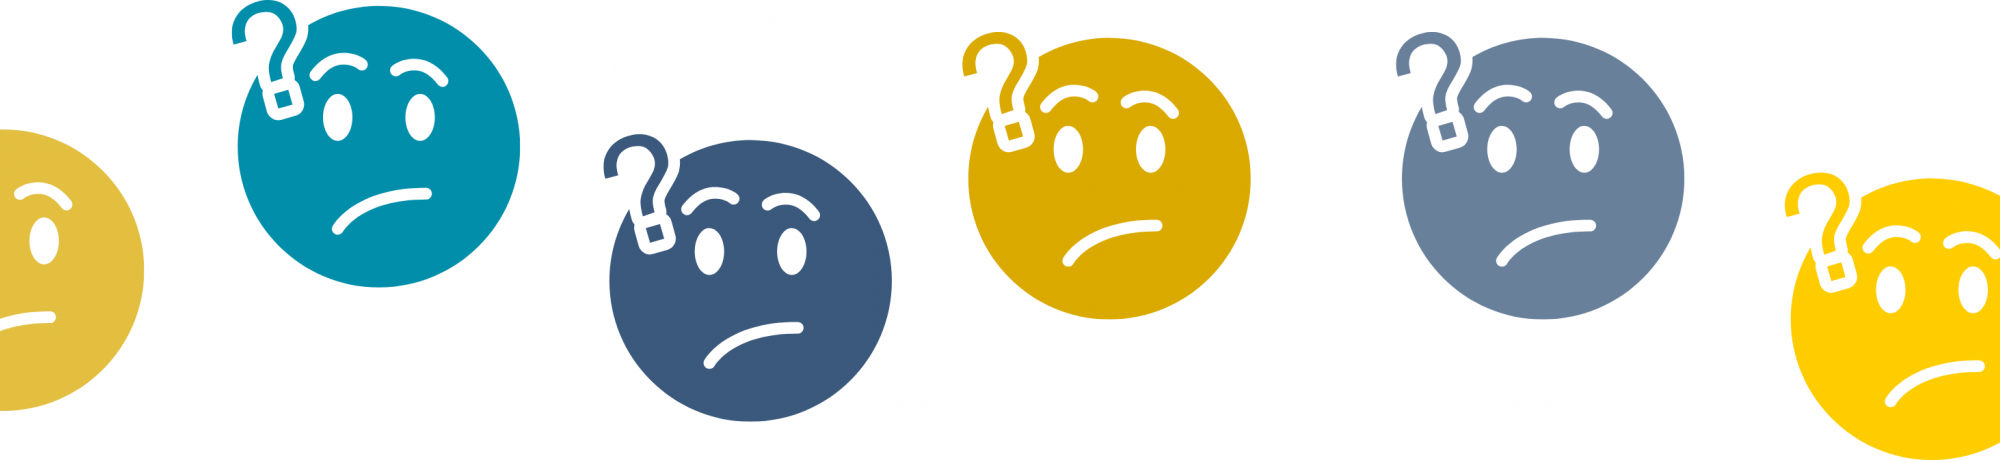 a line of face icons with question marks on their heads